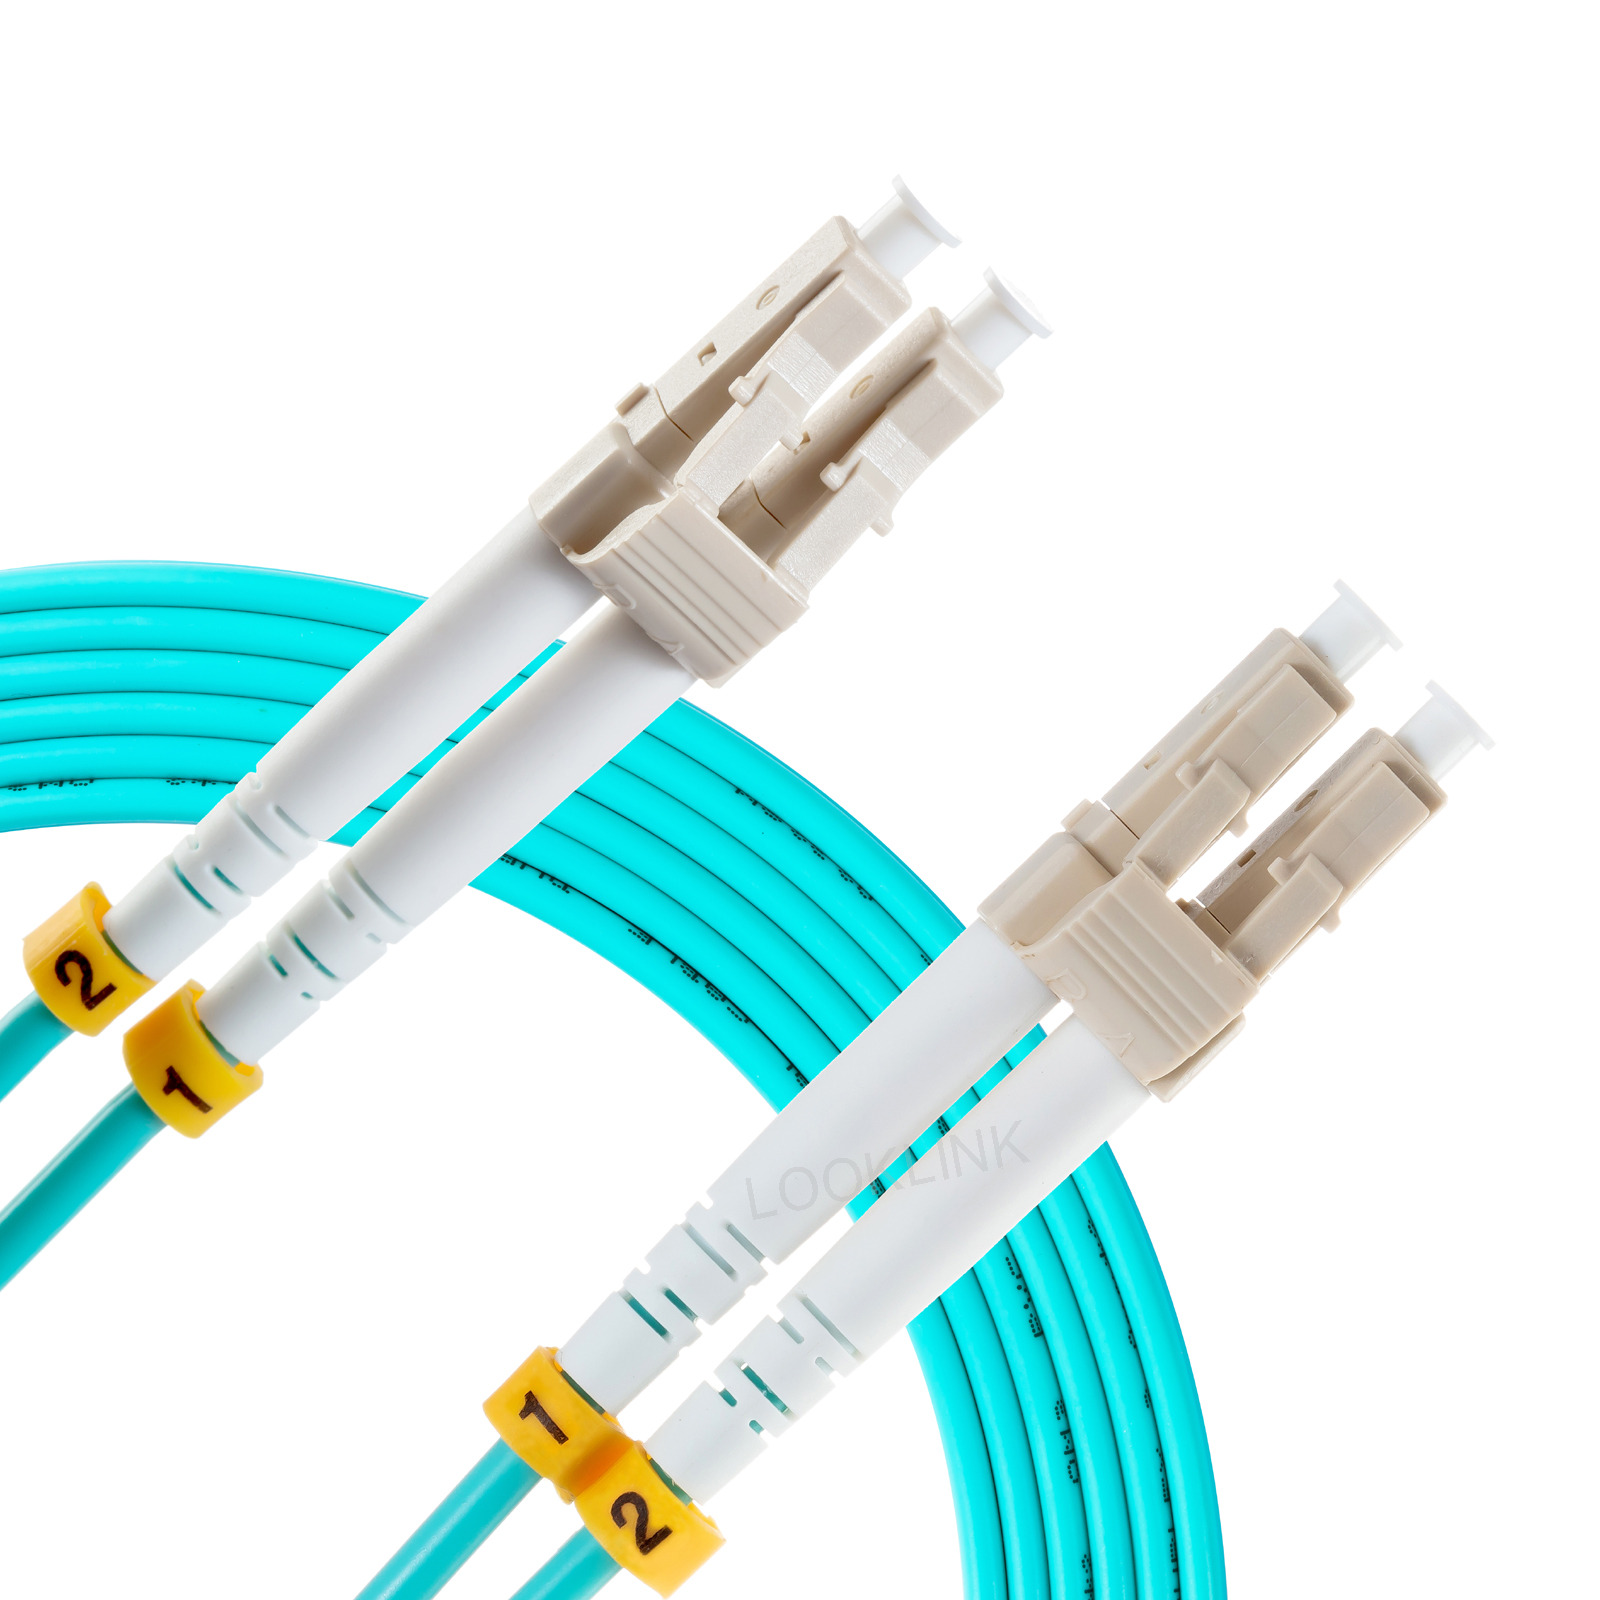 150M/492FT 3.0 10G-50/125 OM3 Multimode Duplex LC to LC Fiber Optic Patch Cable